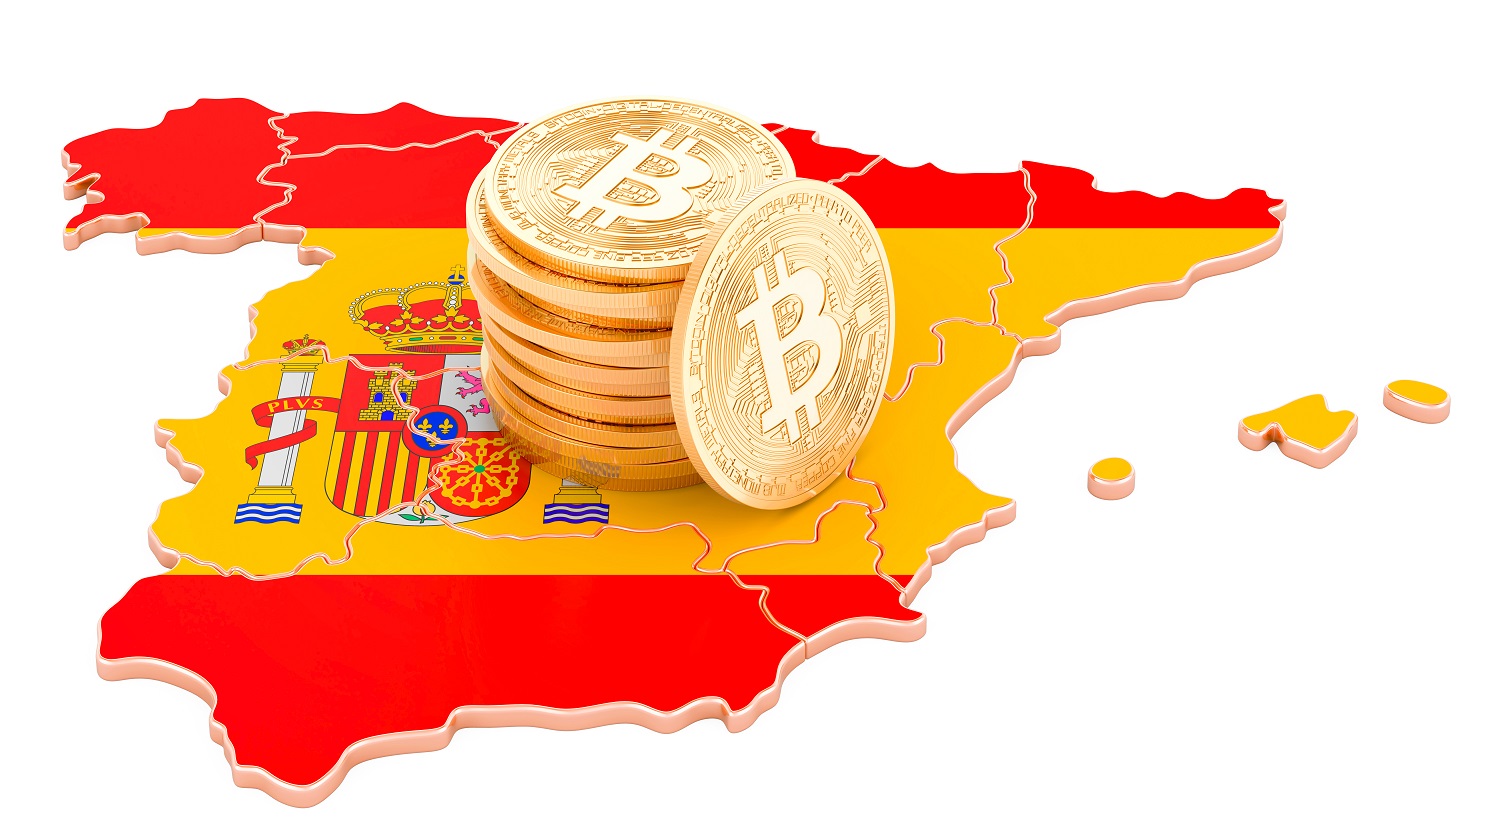 A 3D map of Spain, decorated in the colors of the Spanish national flag, with a pile of metal tokens intended to represent Bitcoin.